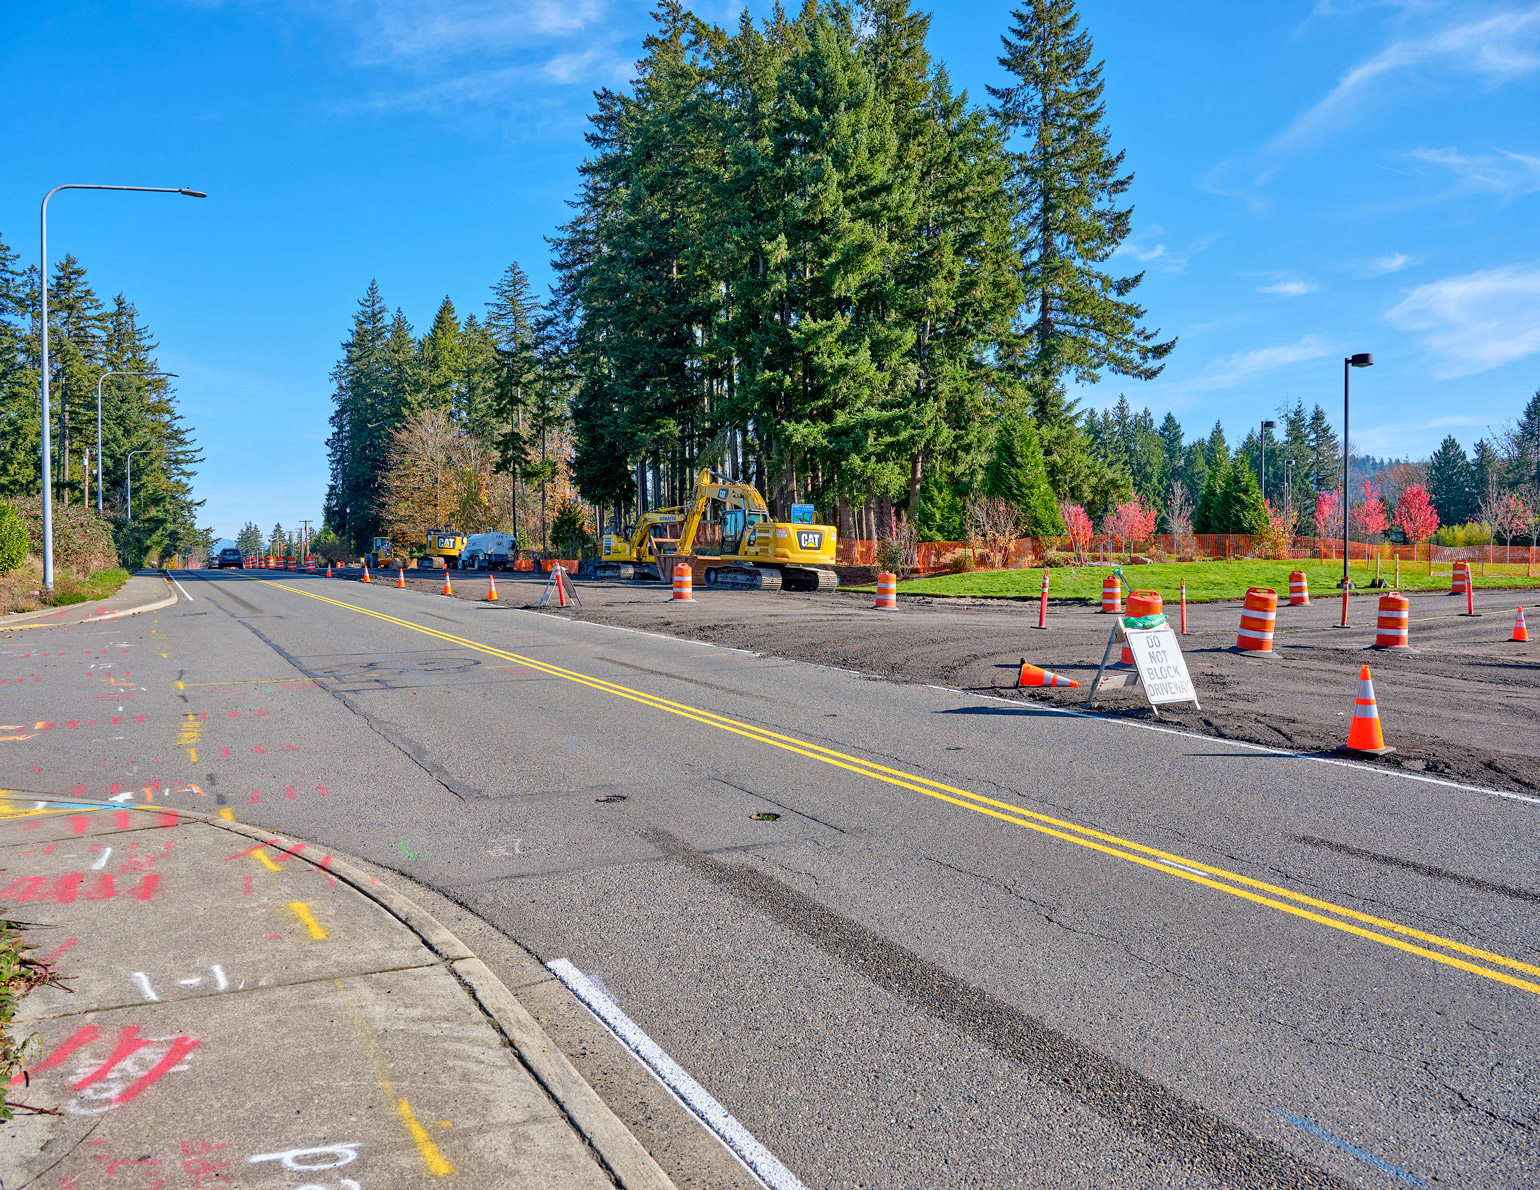 construction on Issaquah Fall City Road, with space cleared for additional work adjacent to an existing paved lane, traffic barriers lining the edge